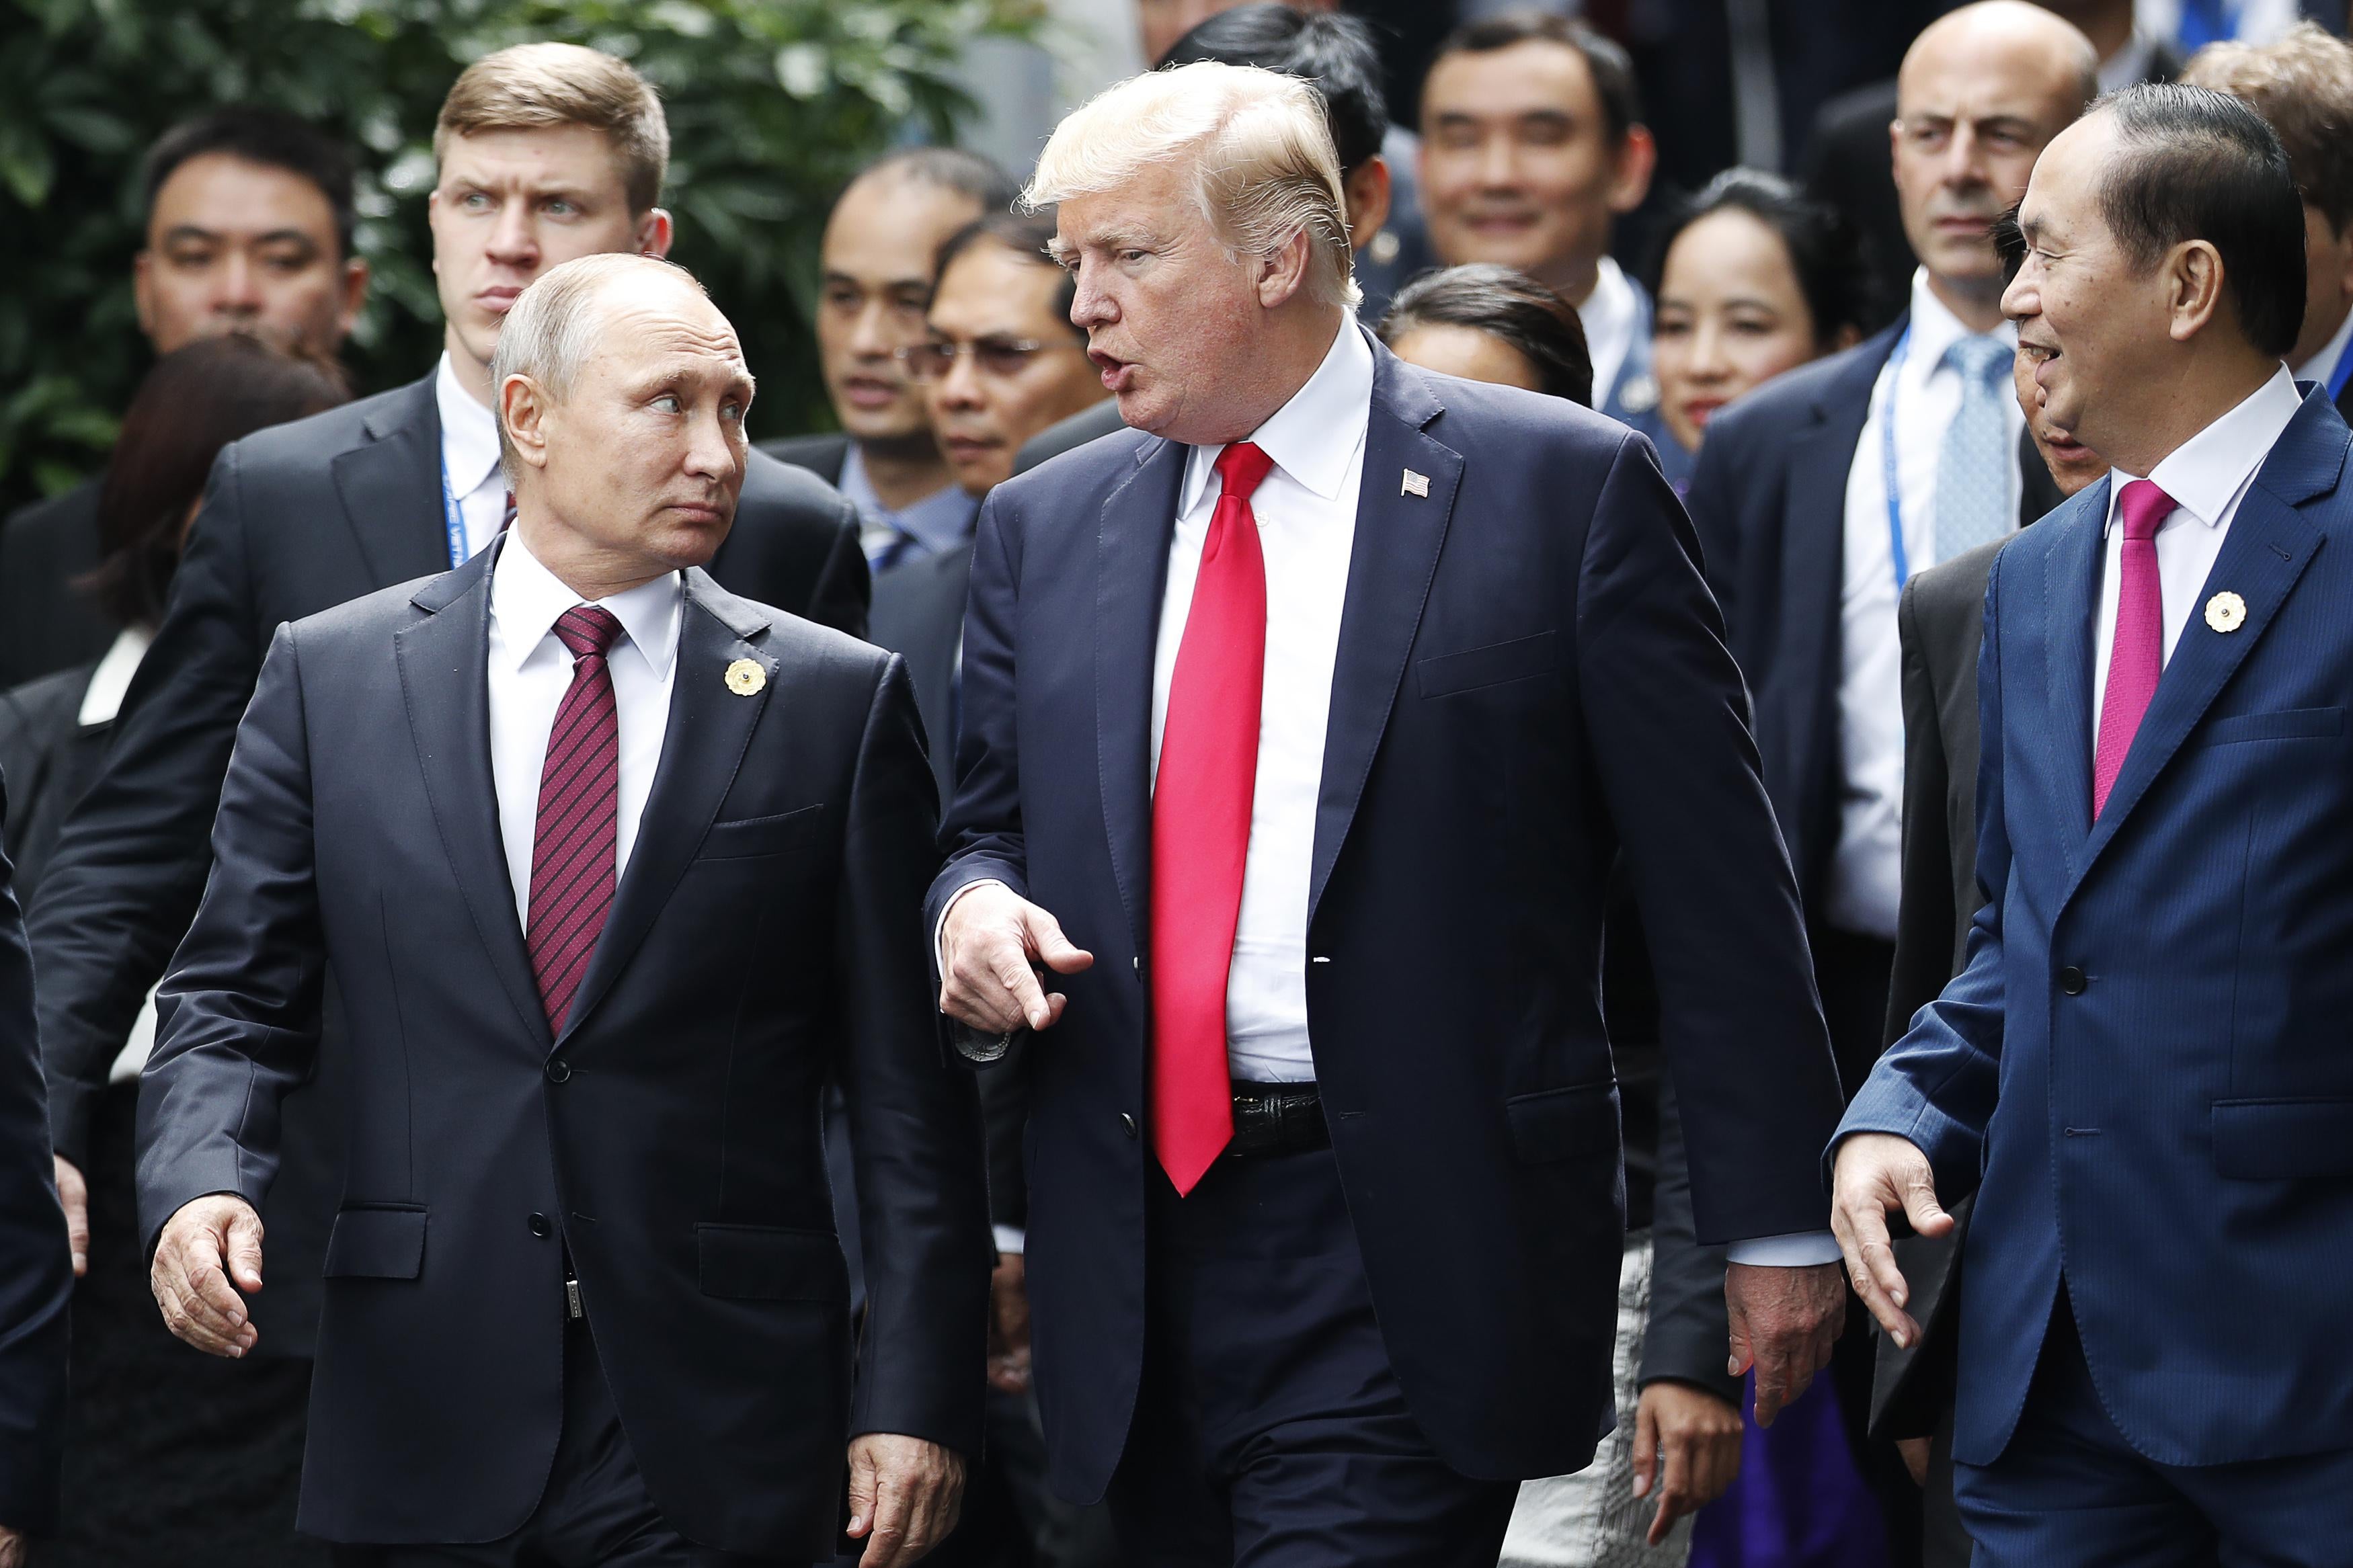 US President Donald Trump (C) and Russia's President Vladimir Putin talk as they make their way to take the 'family photo' during the Asia-Pacific Economic Cooperation (APEC) leaders' summit in the central Vietnamese city of Danang on November 11, 2017.
World leaders and senior business figures are gathering in the Vietnamese city of Danang this week for the annual 21-member APEC summit. / AFP PHOTO / POOL / JORGE SILVA        (Photo credit should read JORGE SILVA/AFP/Getty Images)